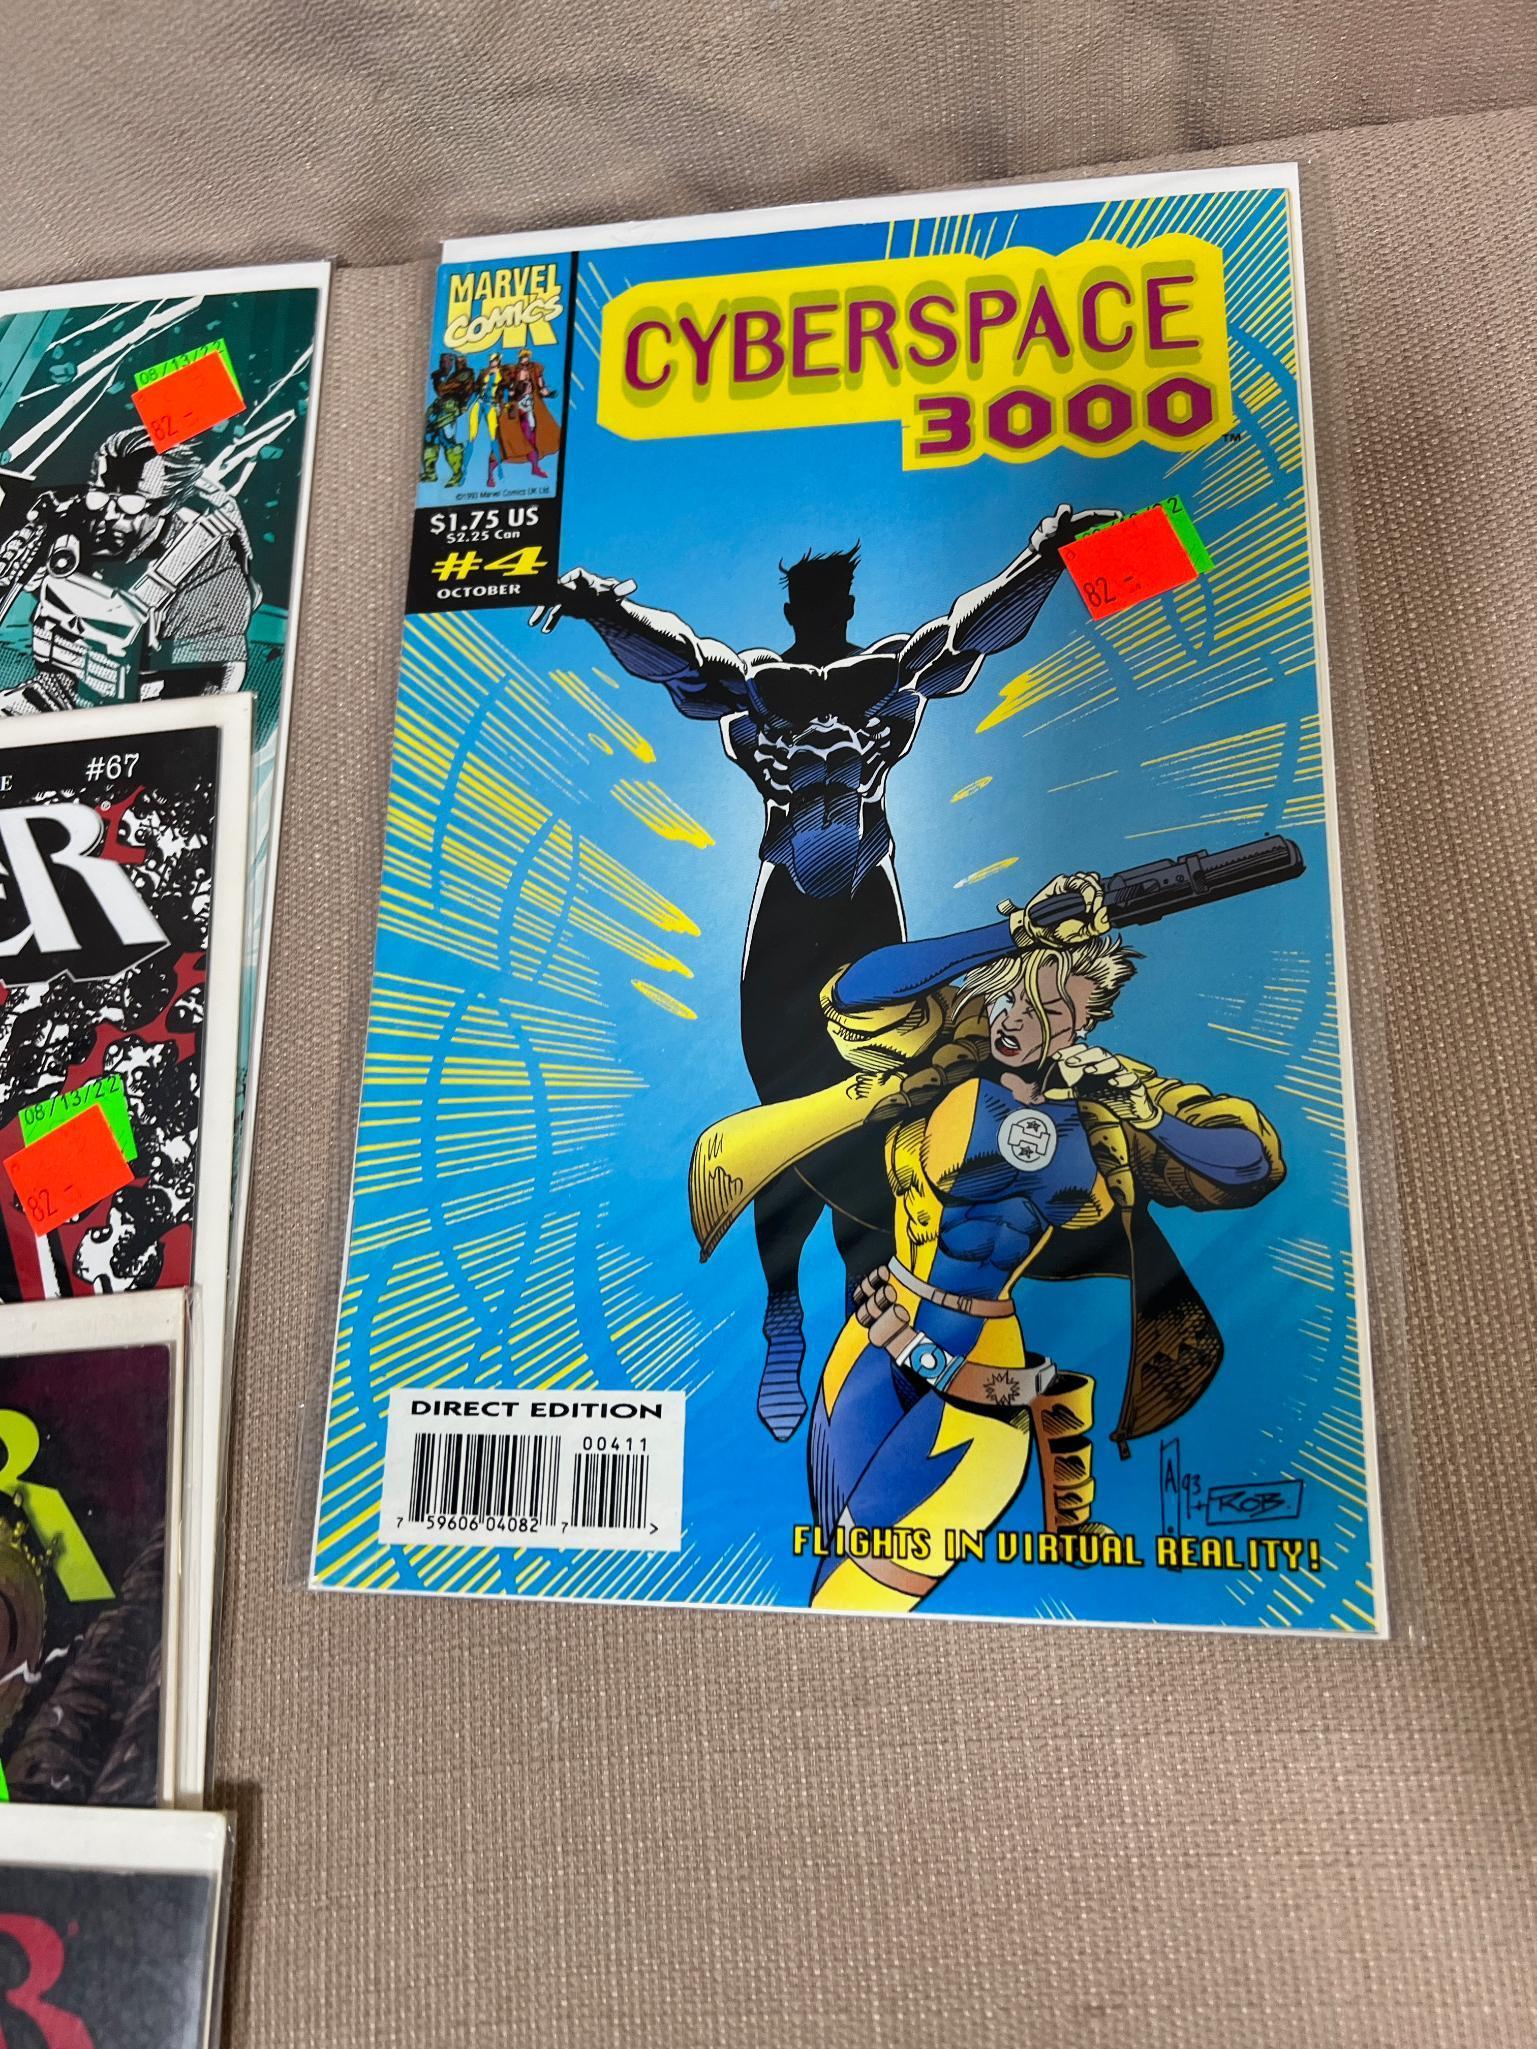 22 Marvel Comics, Digitek 1-4 and asst. Cyberspace 3000, Punisher and more comic books